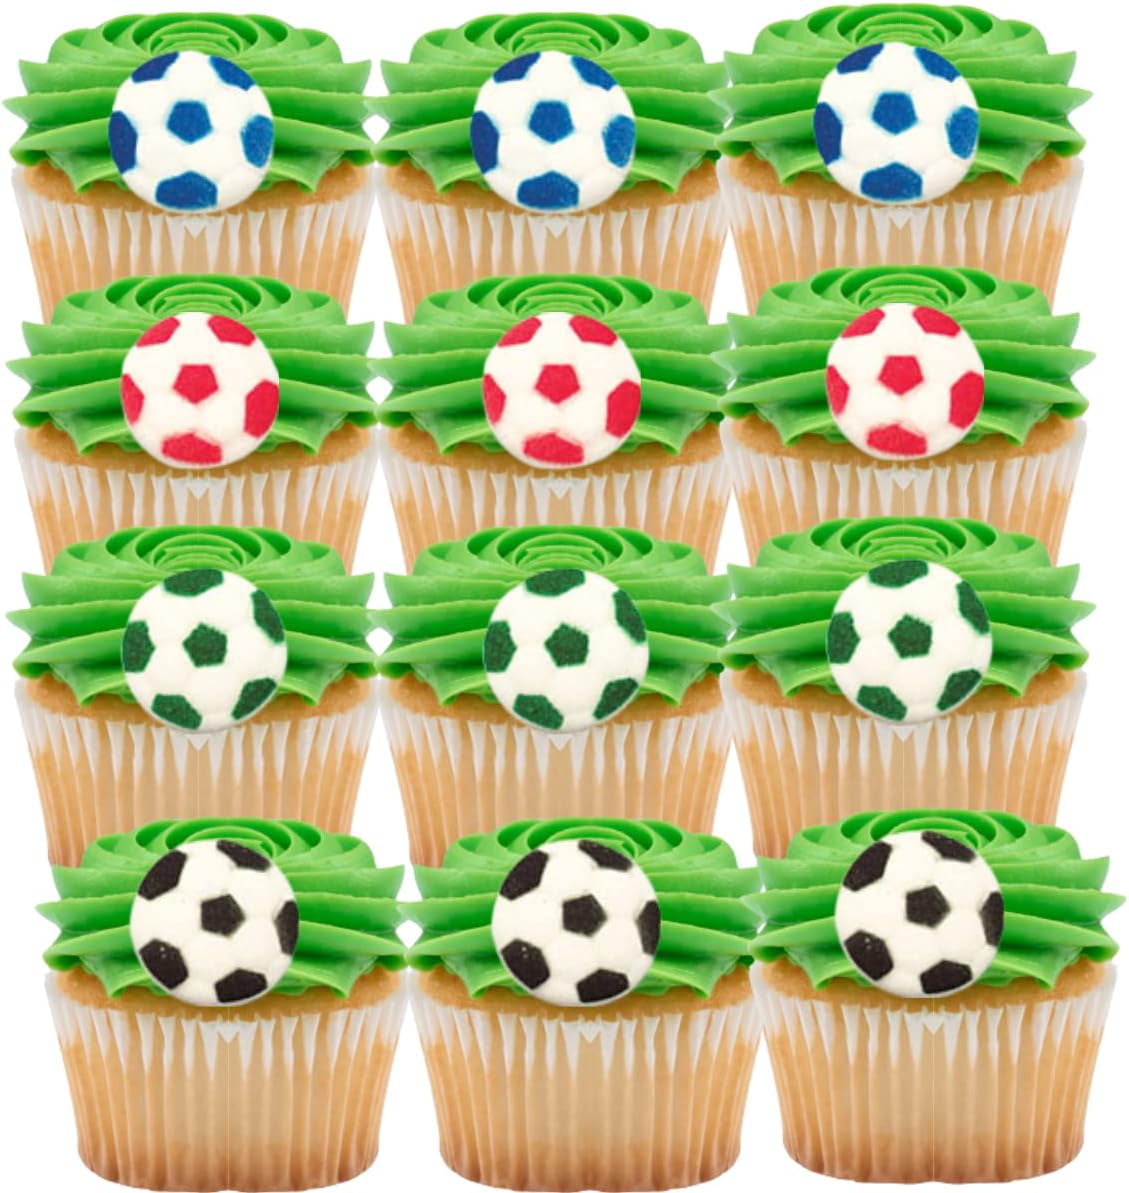 FOOTBALL PITCH CAKE | THE CRVAERY CAKES